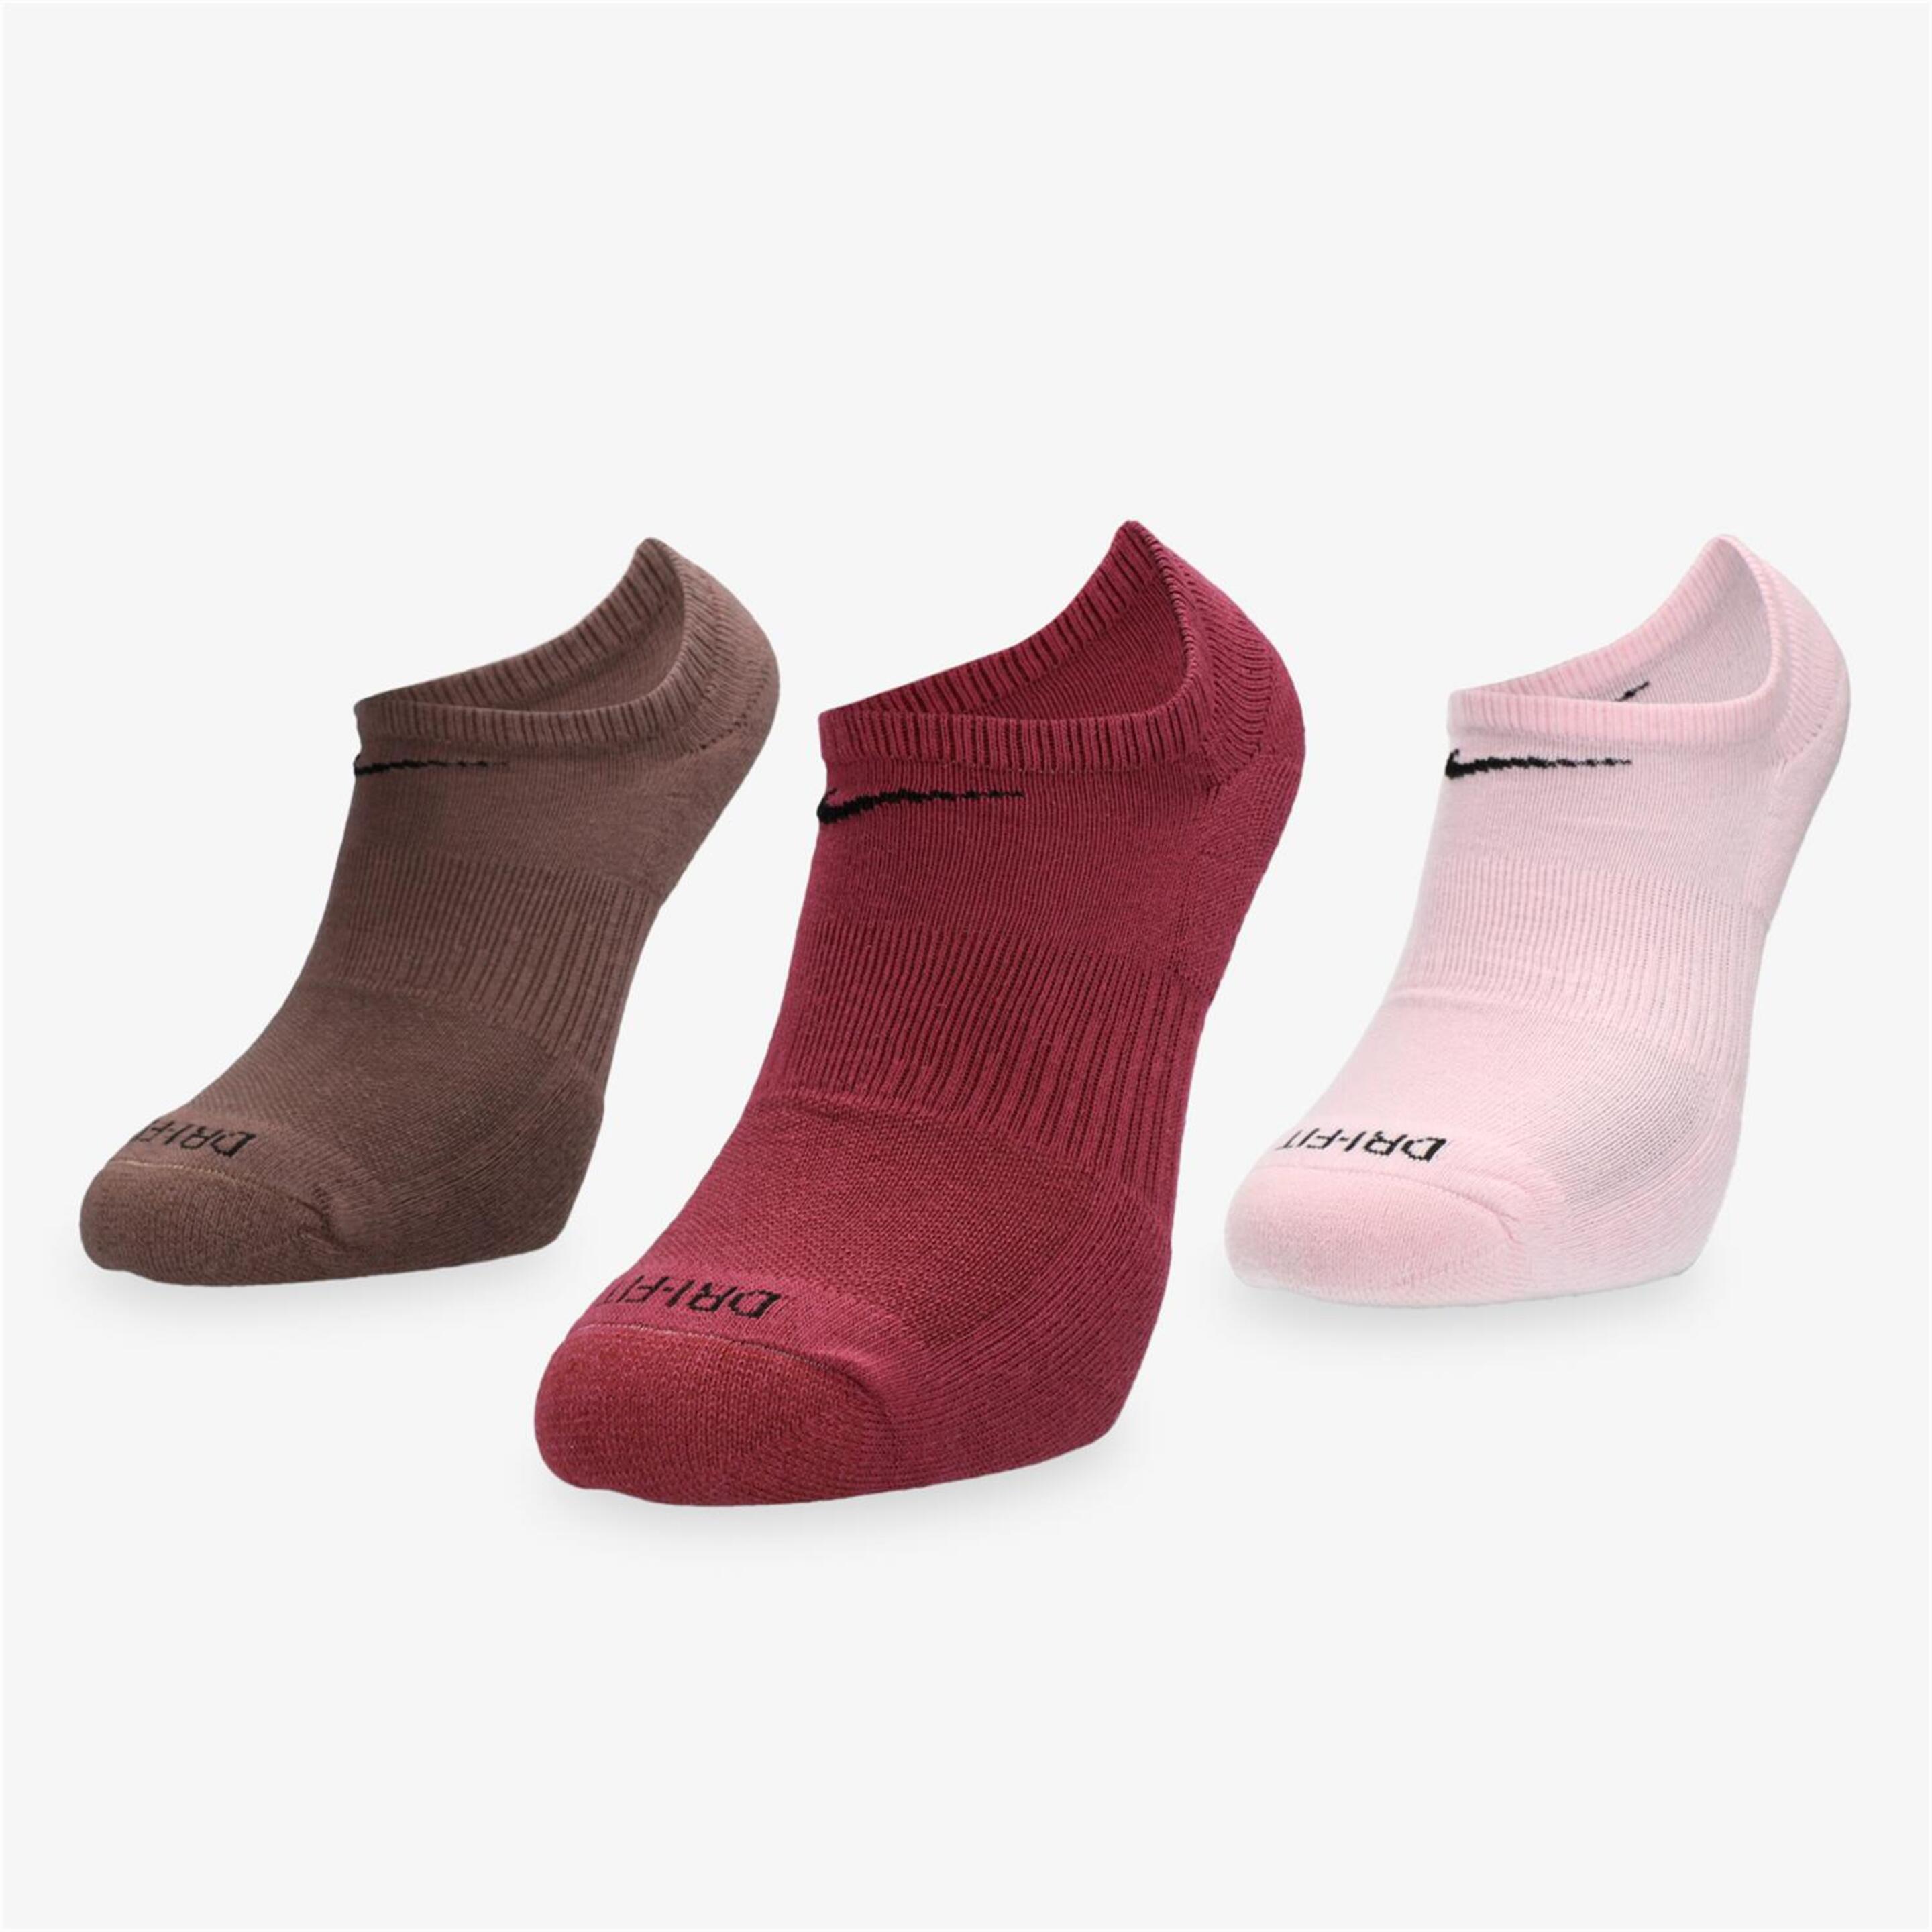 Nike Everyday Plus - marron - Calcetines Invisibles